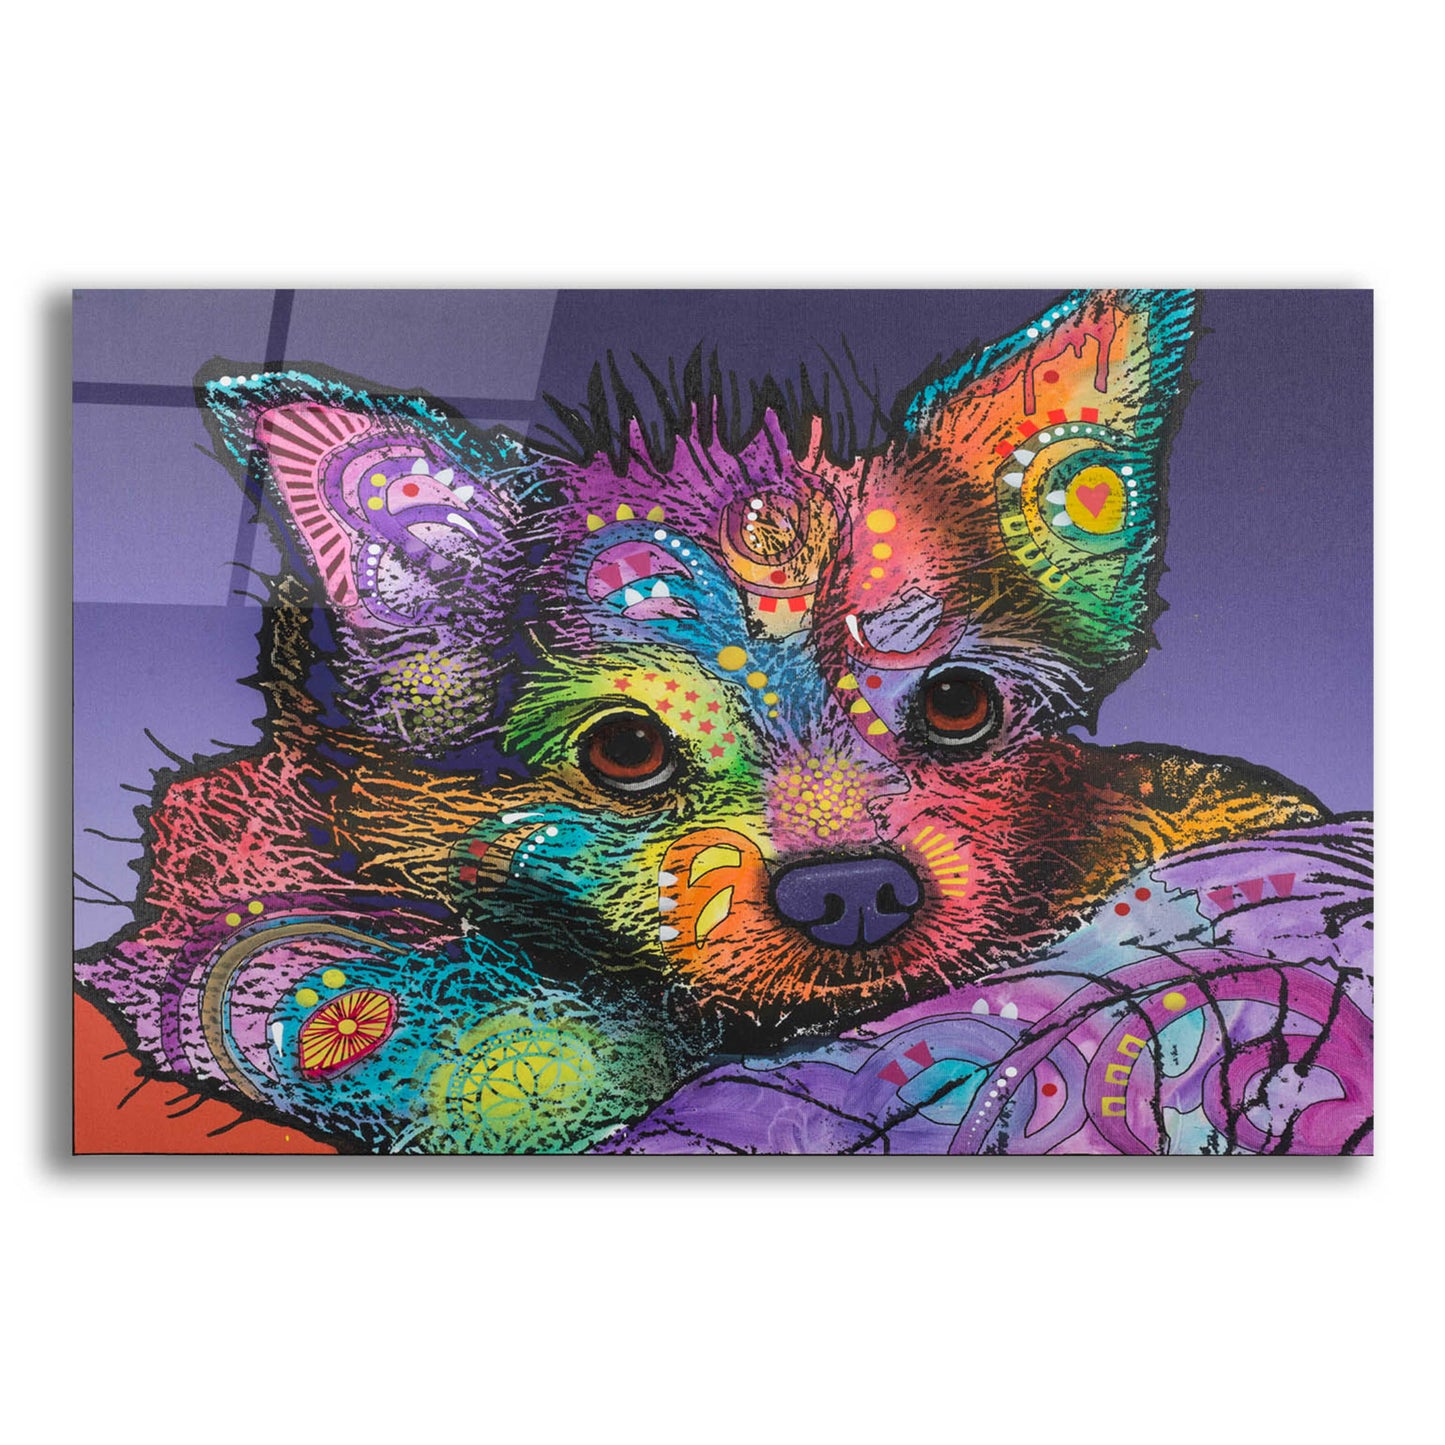 Epic Art 'Romeo' by Dean Russo, Acrylic Glass Wall Art,24x16